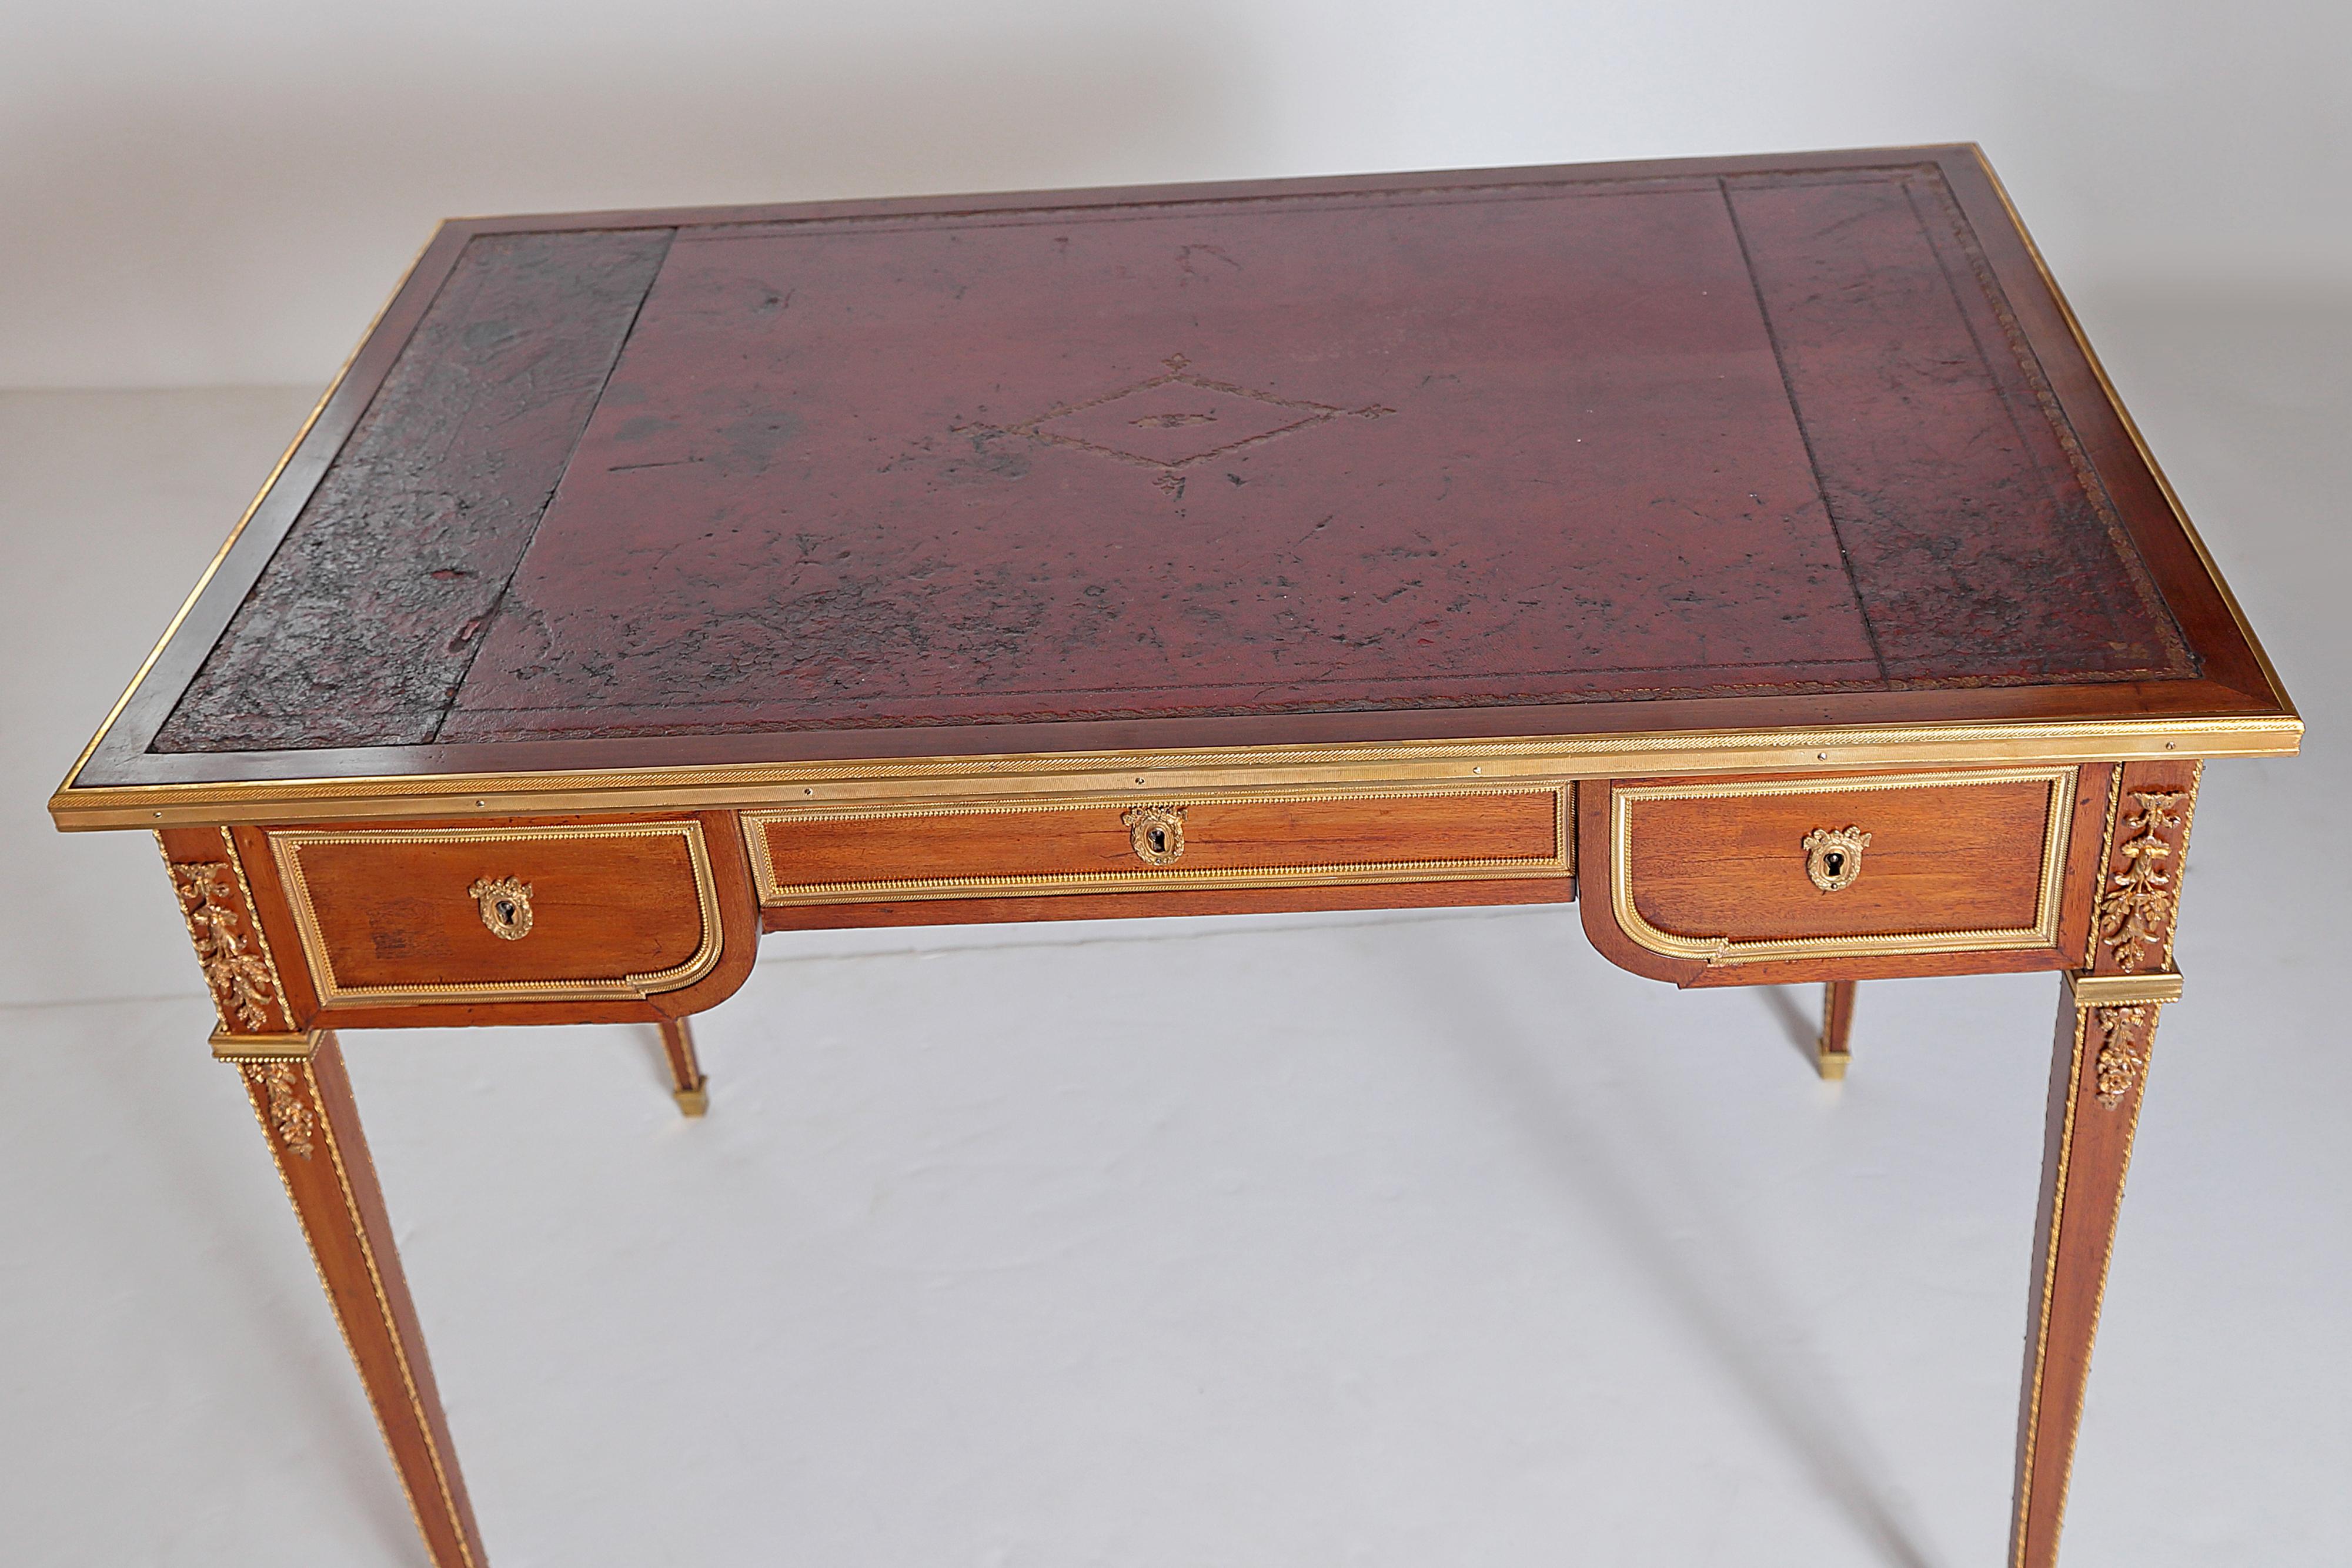 Ormolu Louis XVI Style Writing Table with Red Leather Writing Surface